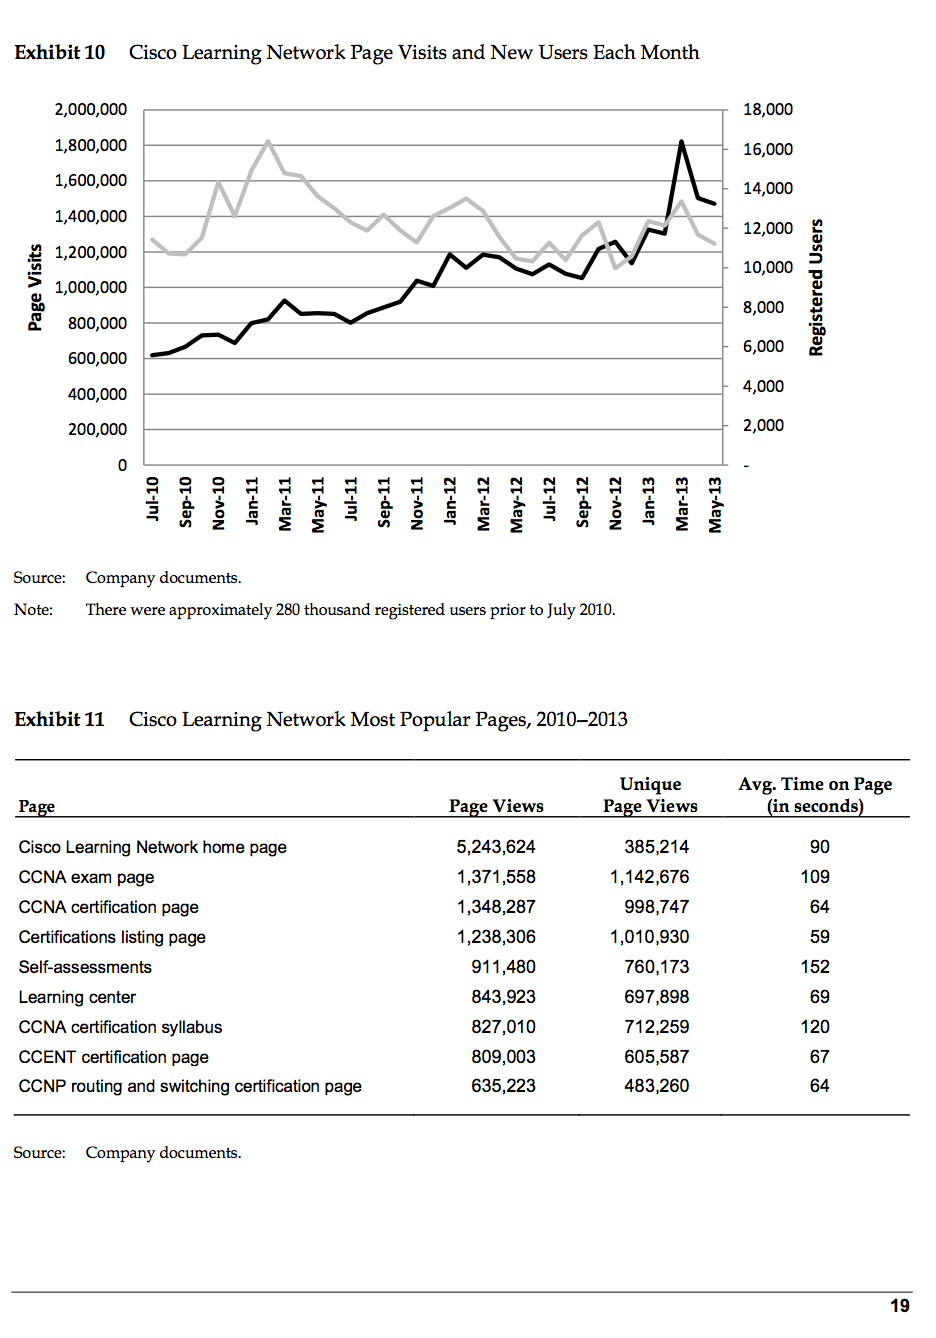 Graph and Table above showing Cisco Learning Network Most Popular Pages